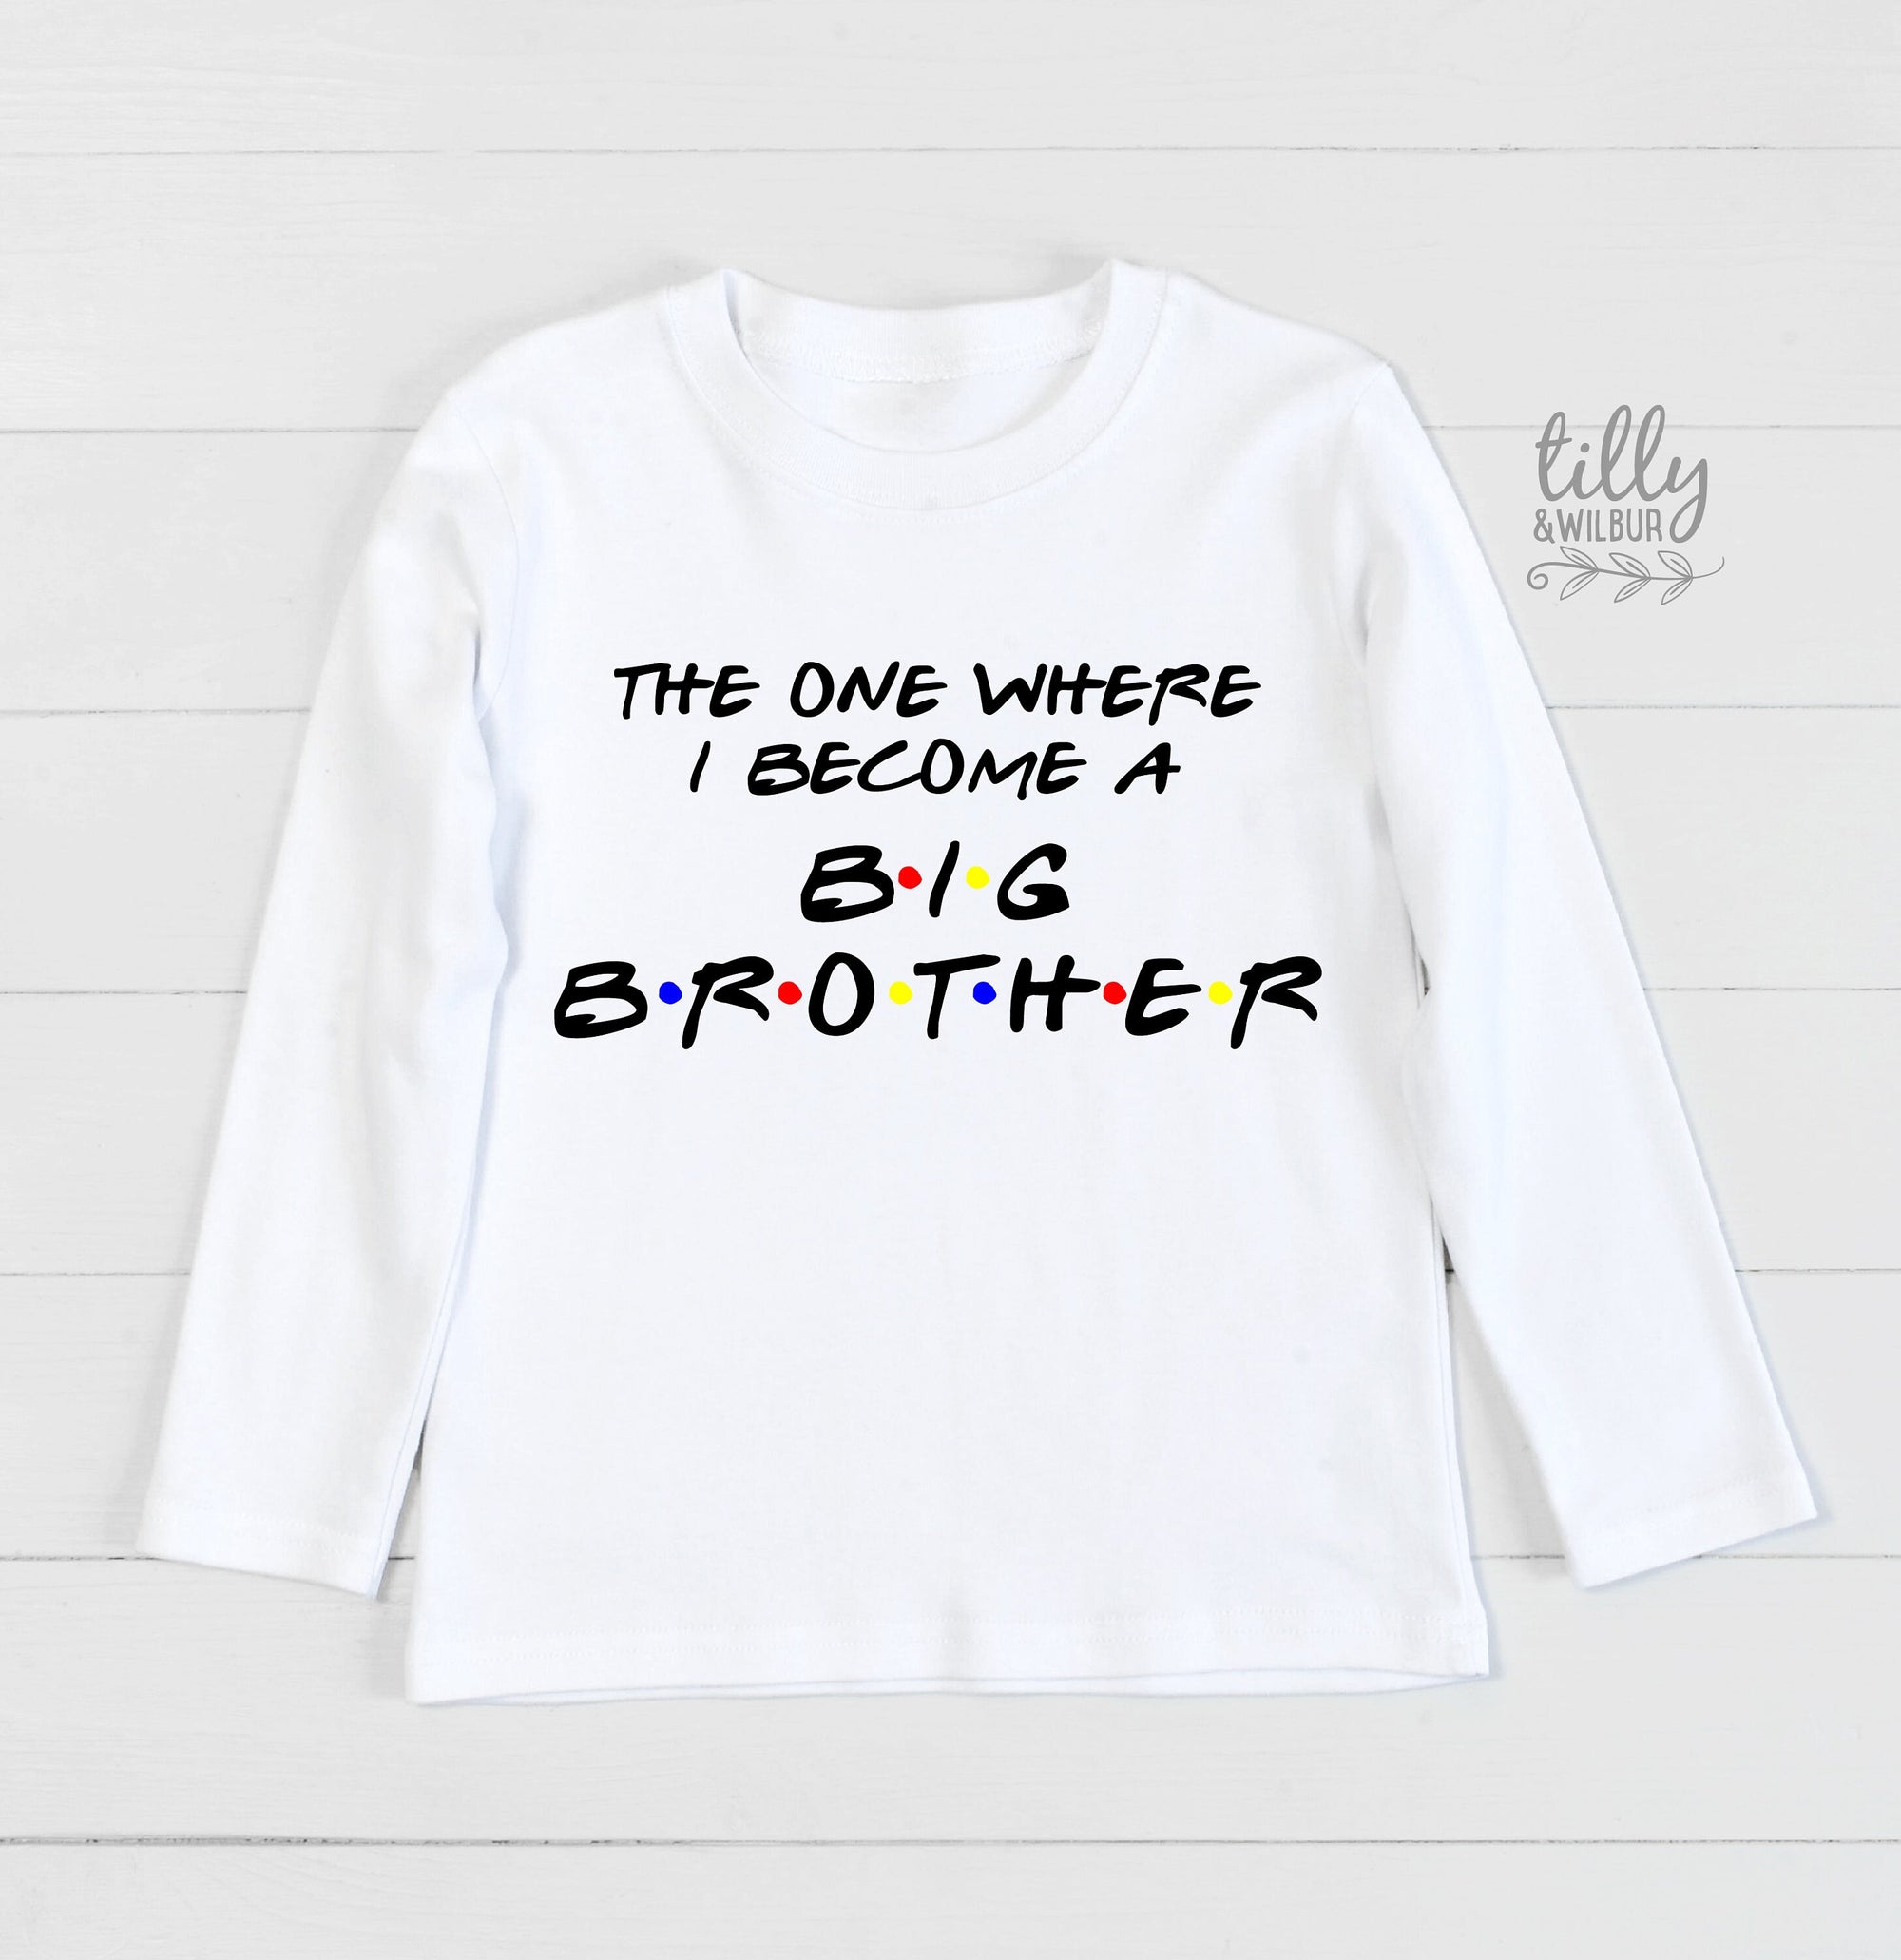 The One Where I Become A Big Brother T-Shirt, Big Brother Friends T-Shirt, I'm Going To Be A Big Brother T-Shirt, Pregnancy Announcement Tee